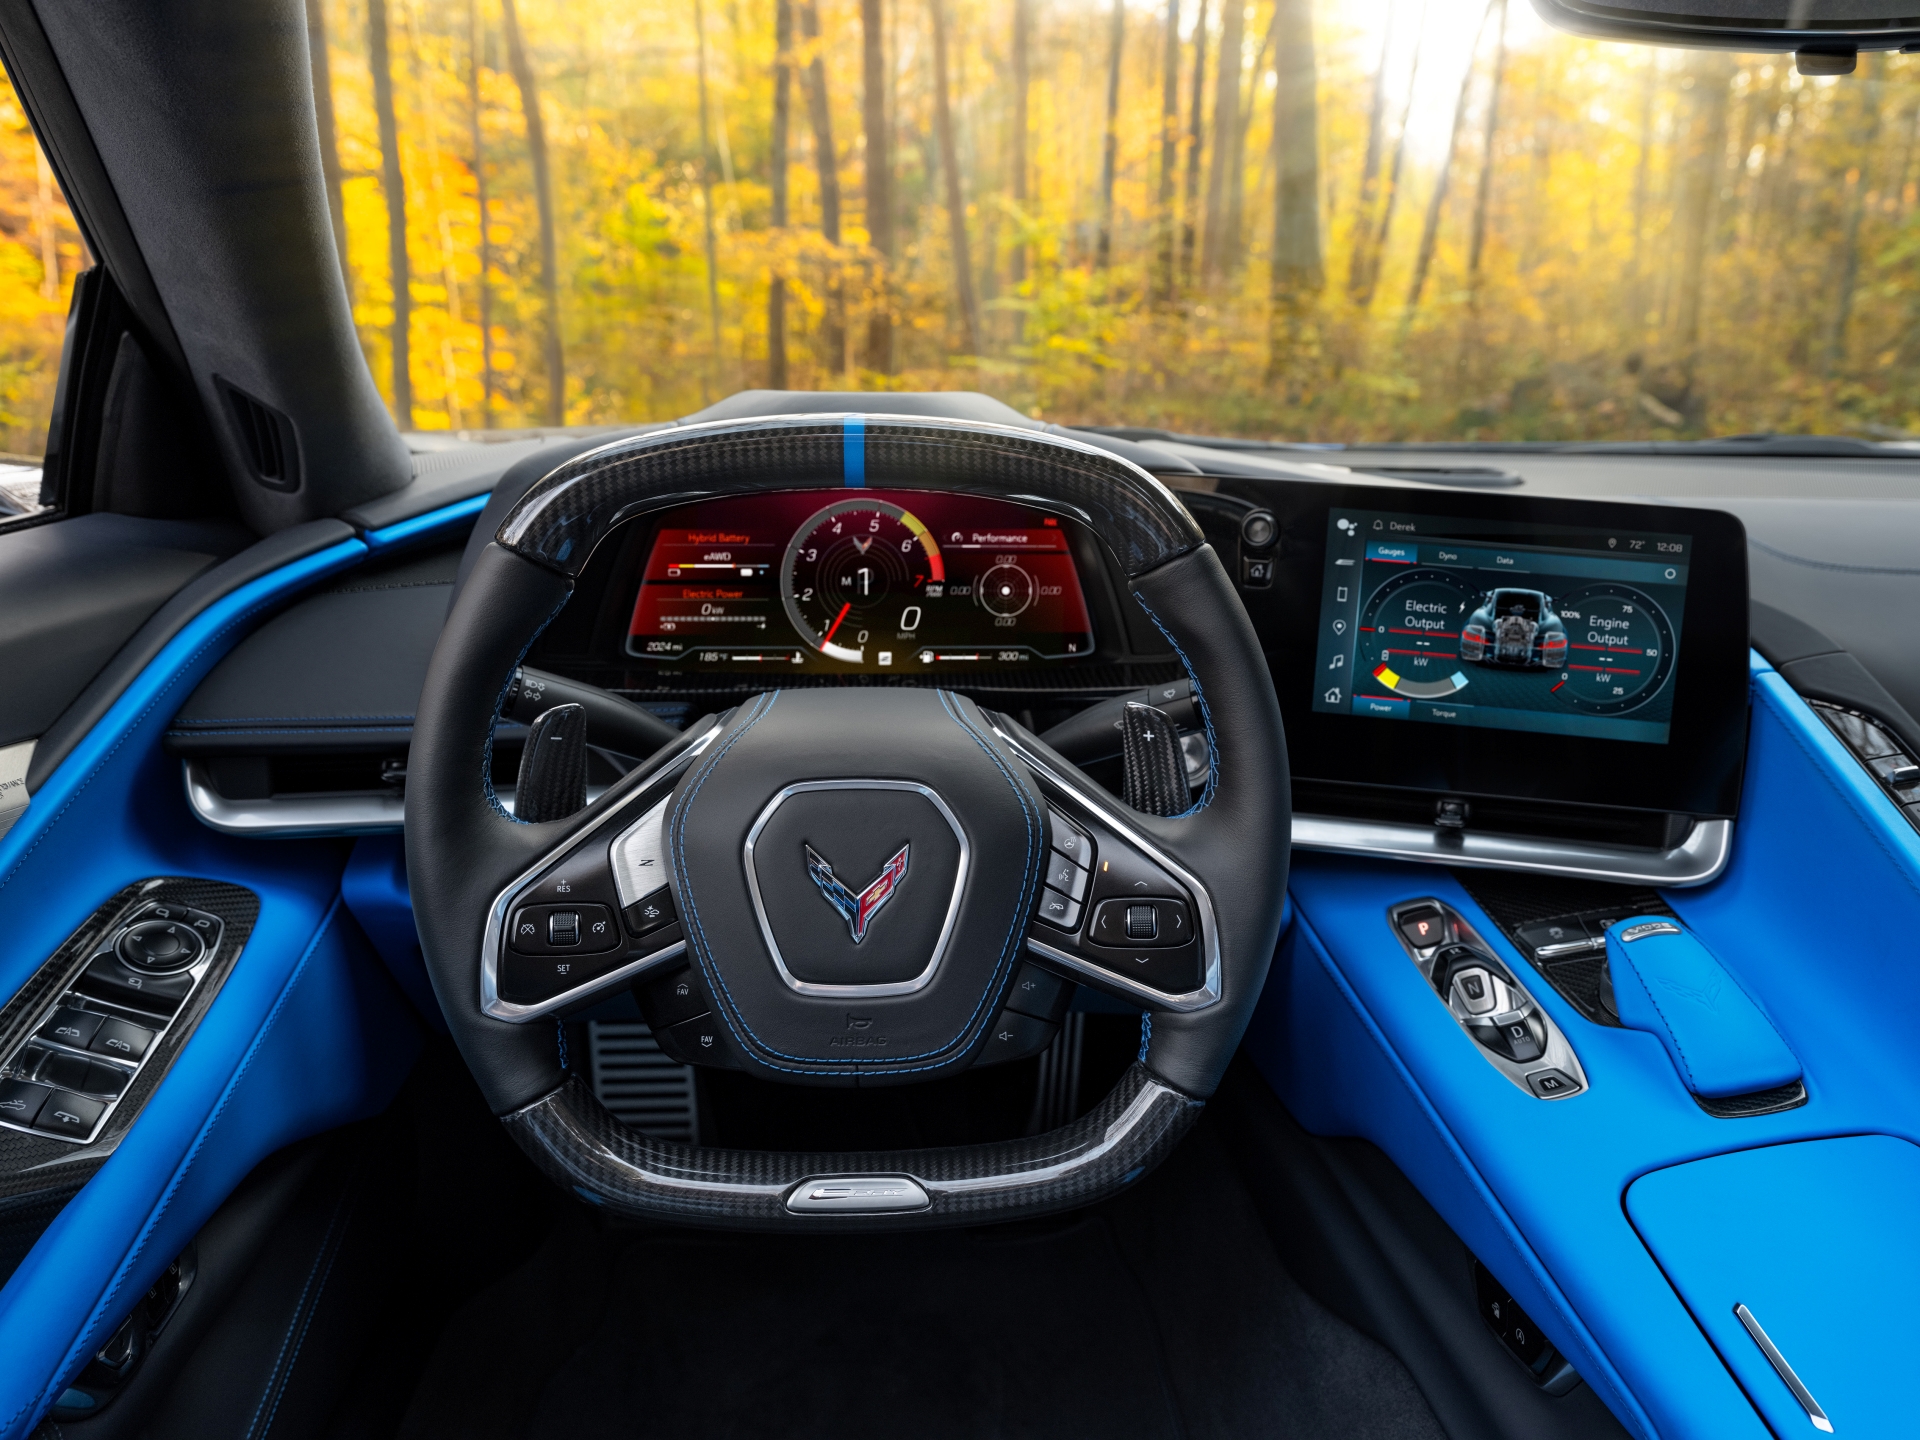 View from driver’s seat in 2024 Chevrolet Corvette E-Ray 3LZ coupe in Silver Flare with Two Tone Blue Interior. Pre-production model shown. Actual production model may vary. Model year 2024 Corvette E-Ray available 2023.